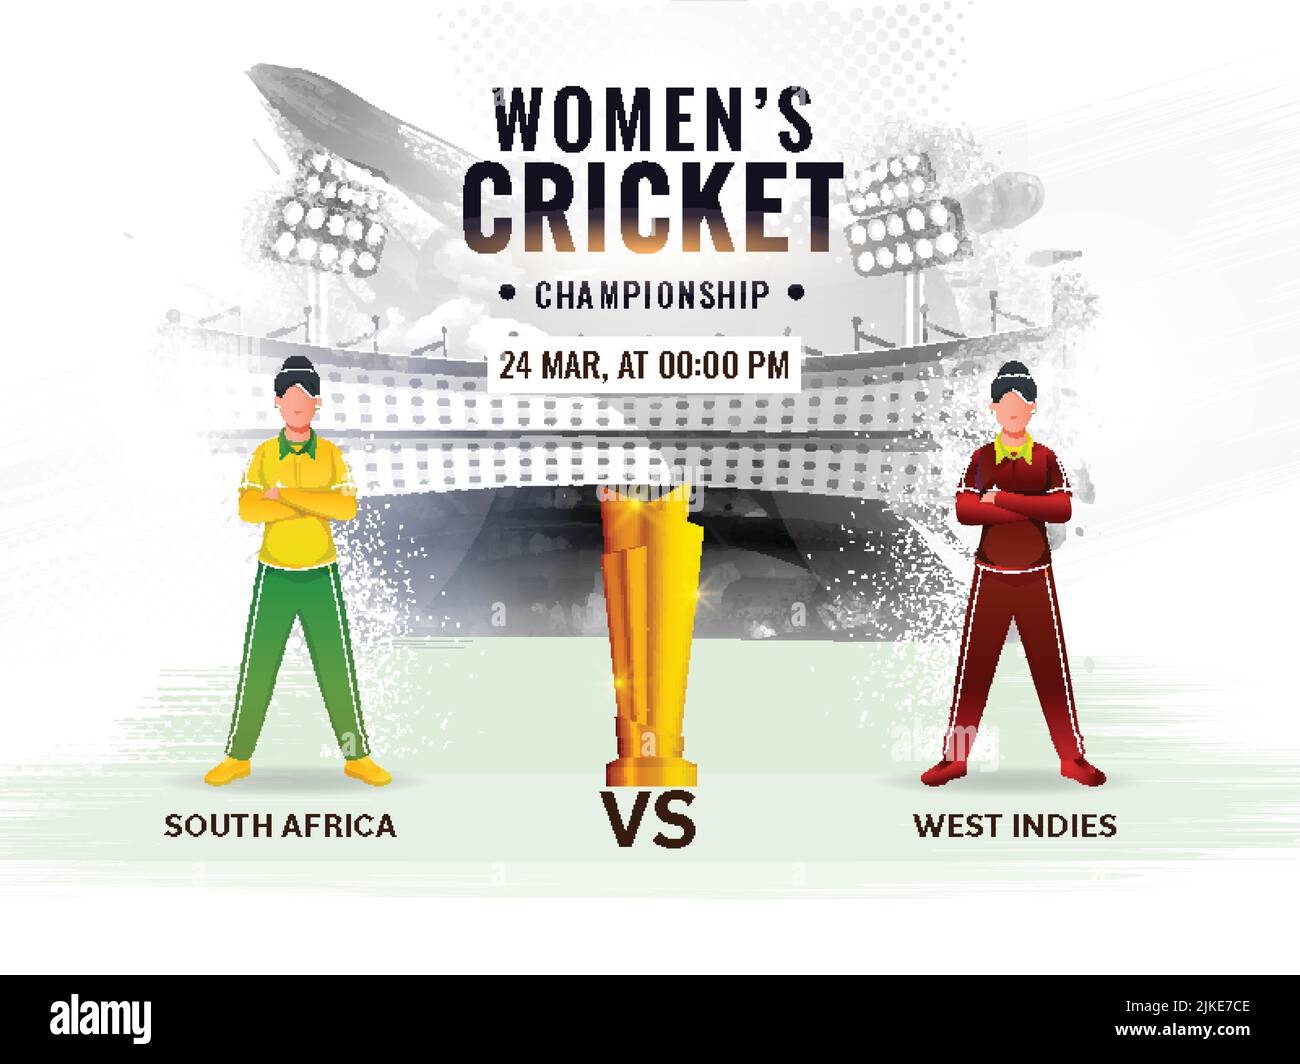 Women's Cricket Match Between South Africa VS West Indies With Faceless Players And Golden Trophy Cup On Abstract Grunge Stadium Background. Stock Vector